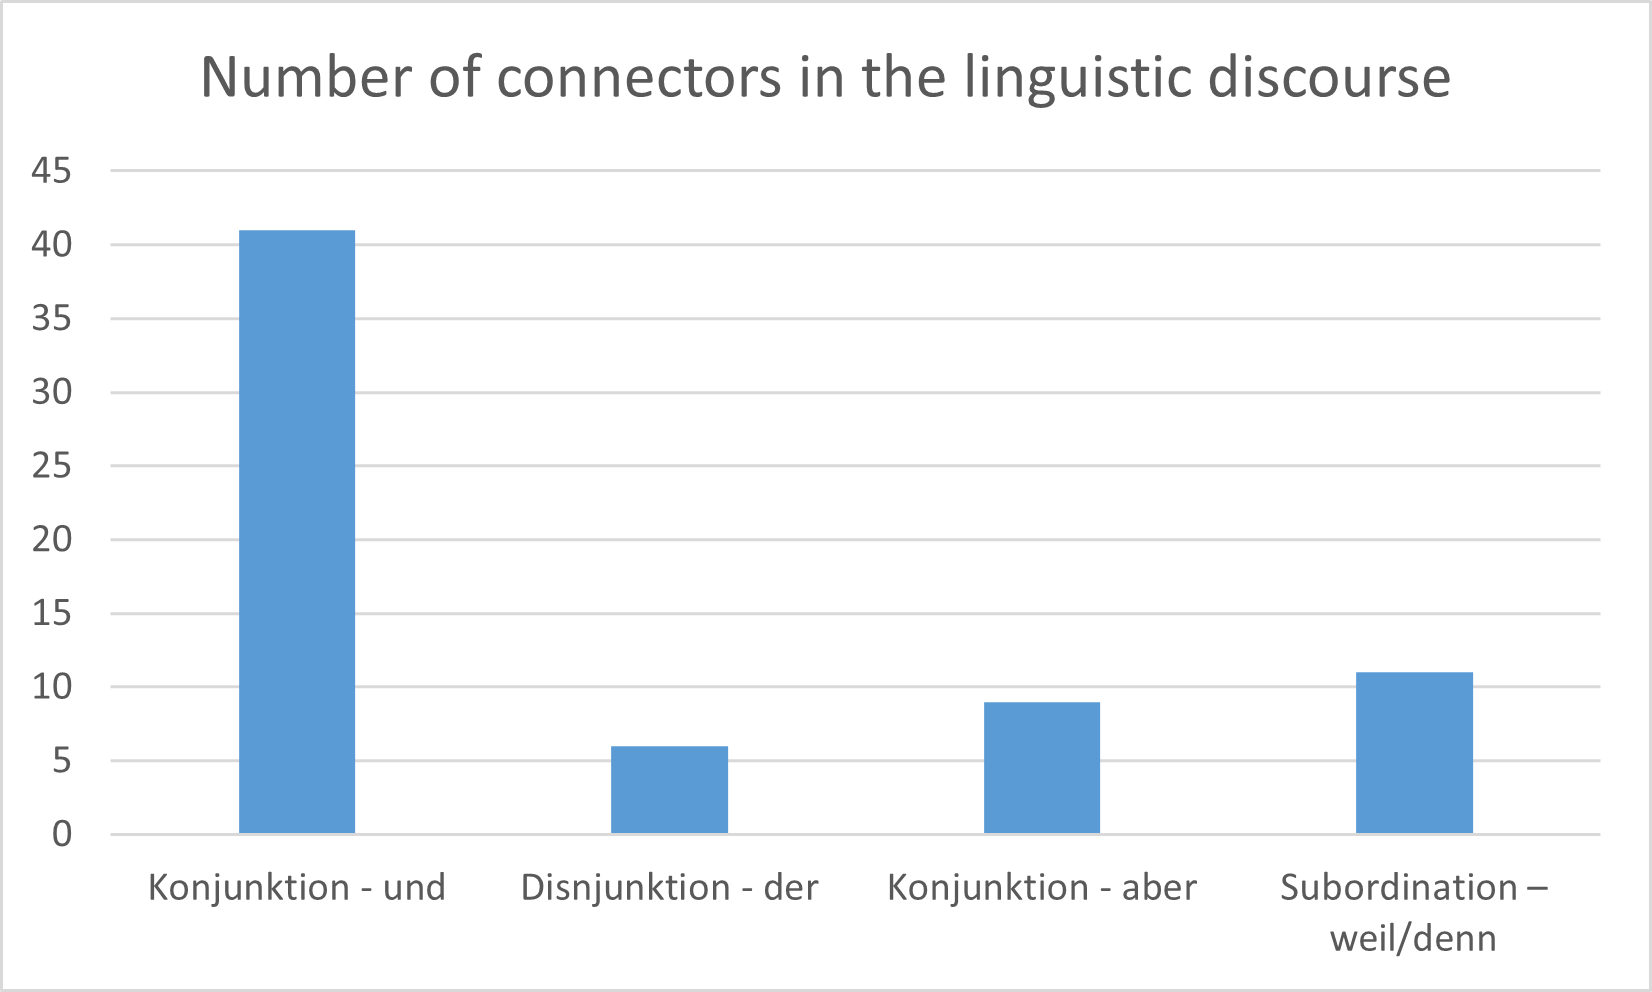 The detection of connectors in the linguistic discourse of Süddeutsche Zeitung magazine, publications of November - December of years 2011 - 2021